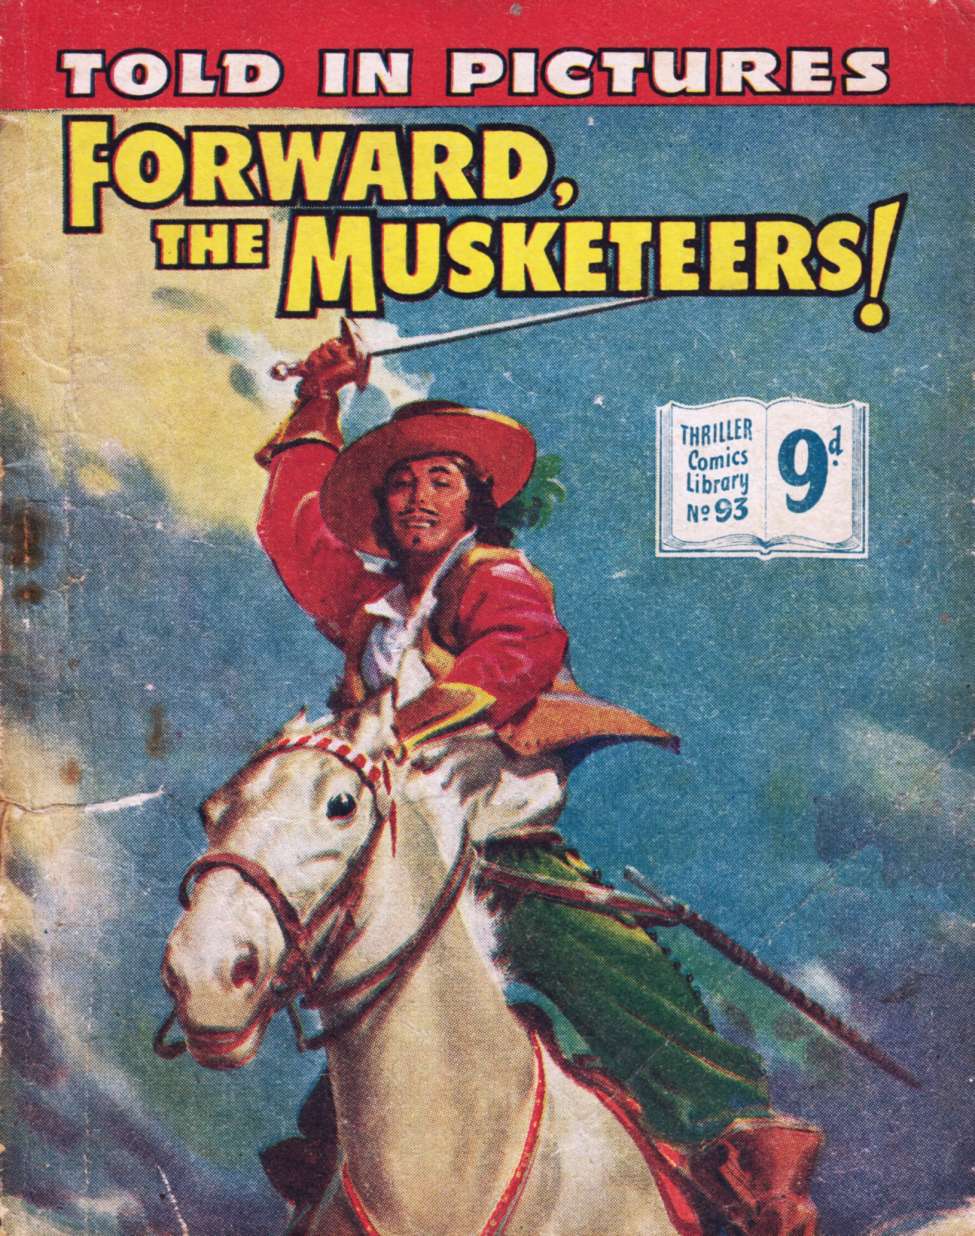 Comic Book Cover For Thriller Comics Library 93 - Forward, the Musketeers!